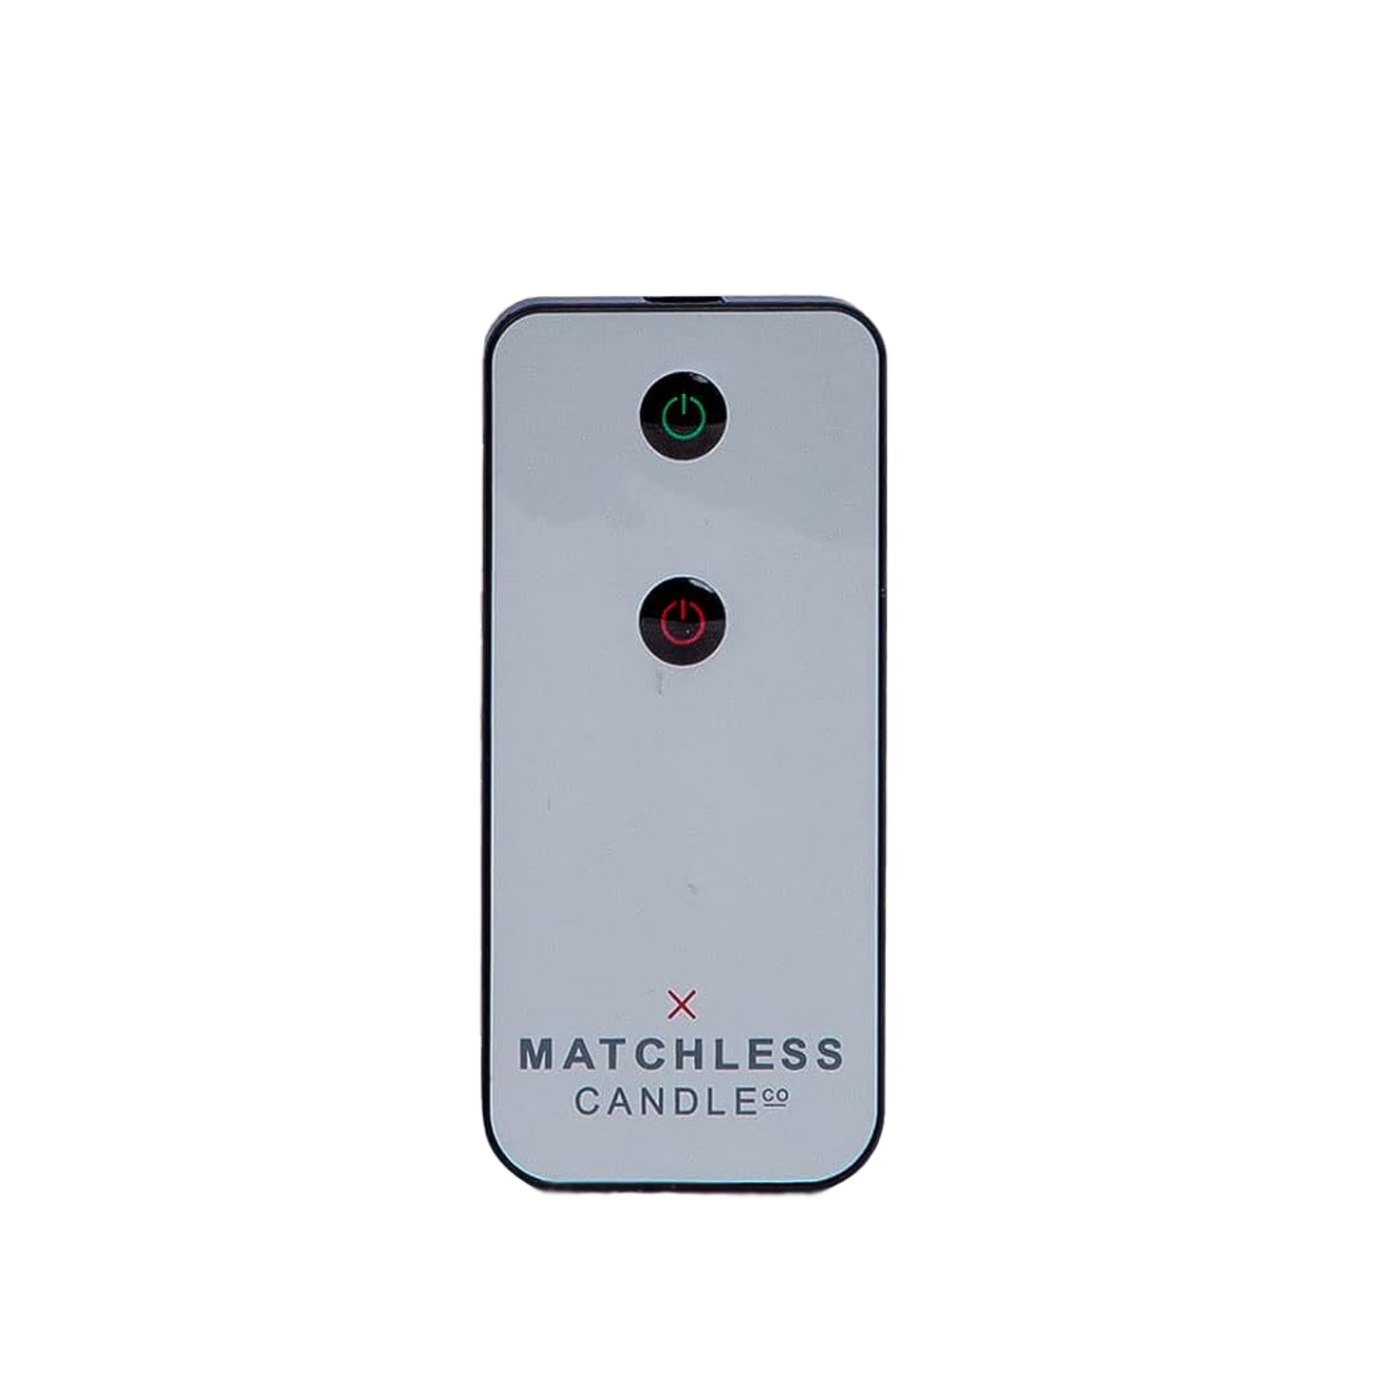 Matchless Moving Flame Candle Remote